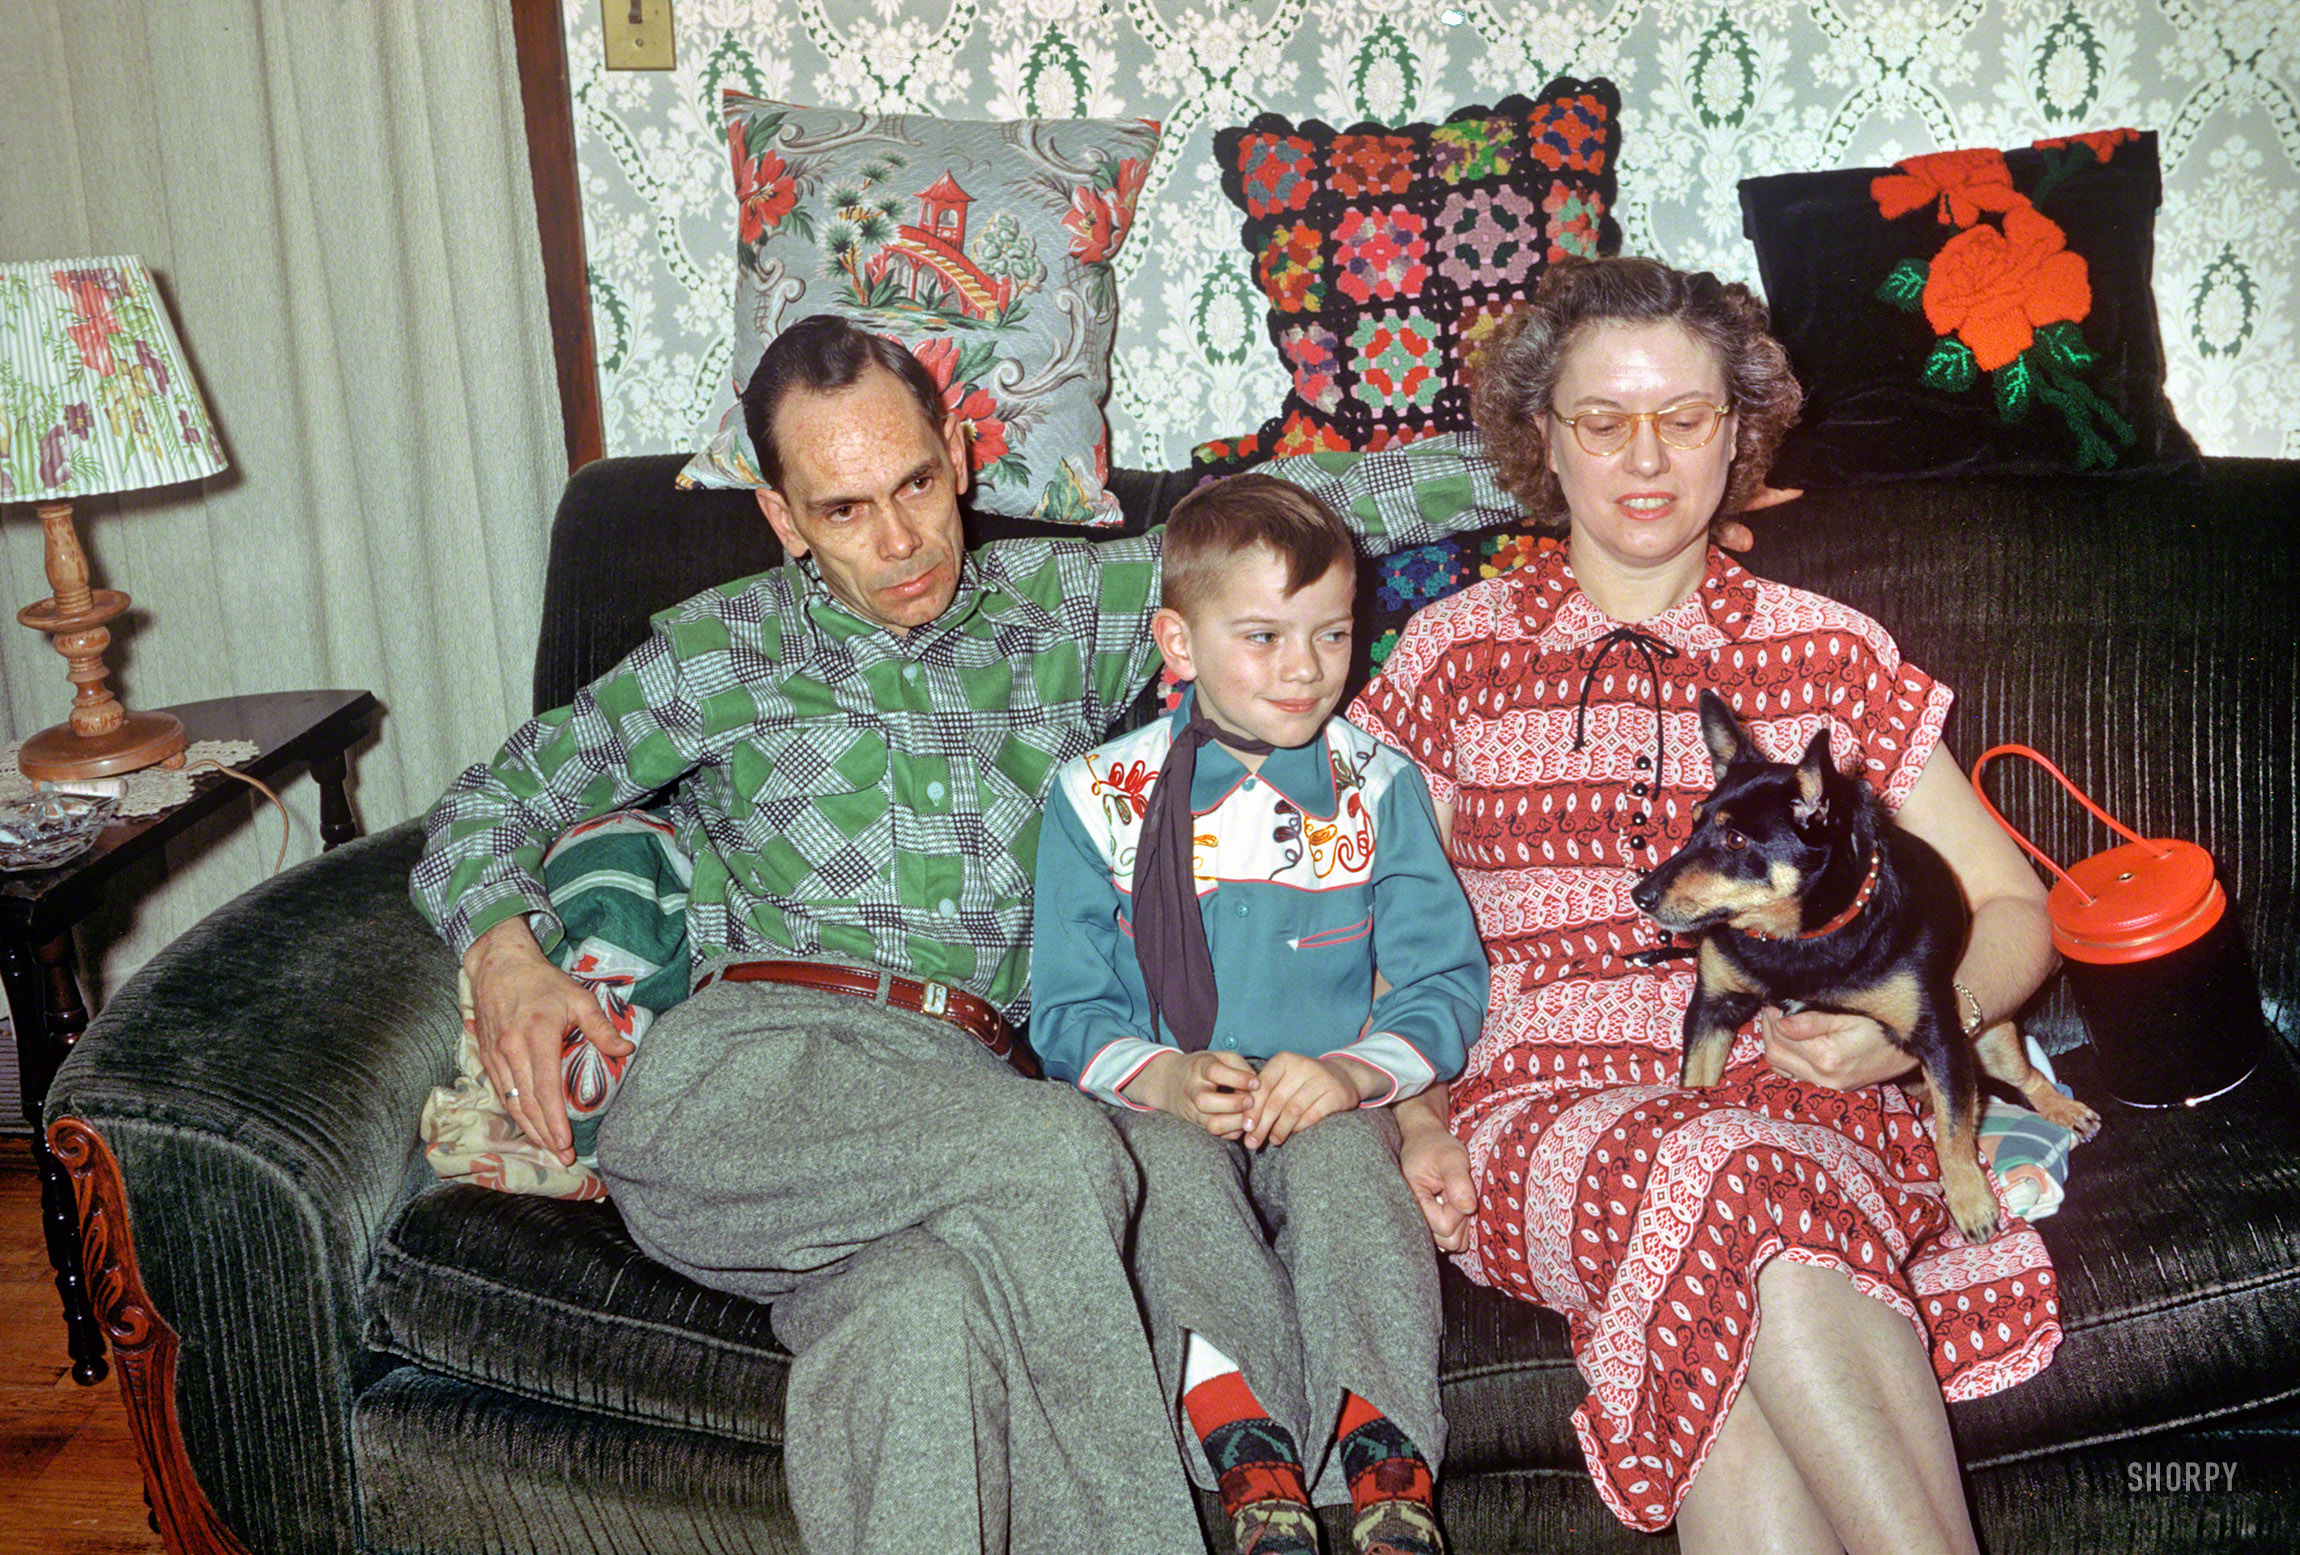 "Floyd, Loren, Dottie & Boots at Folks -- Jan 20 1952." From the shores of Lake Wobegon comes this latest installment of Minnesota Kodachromes. With Loren sporting six-gun sox. 35mm slide by Hubert Tuttle. View full size.